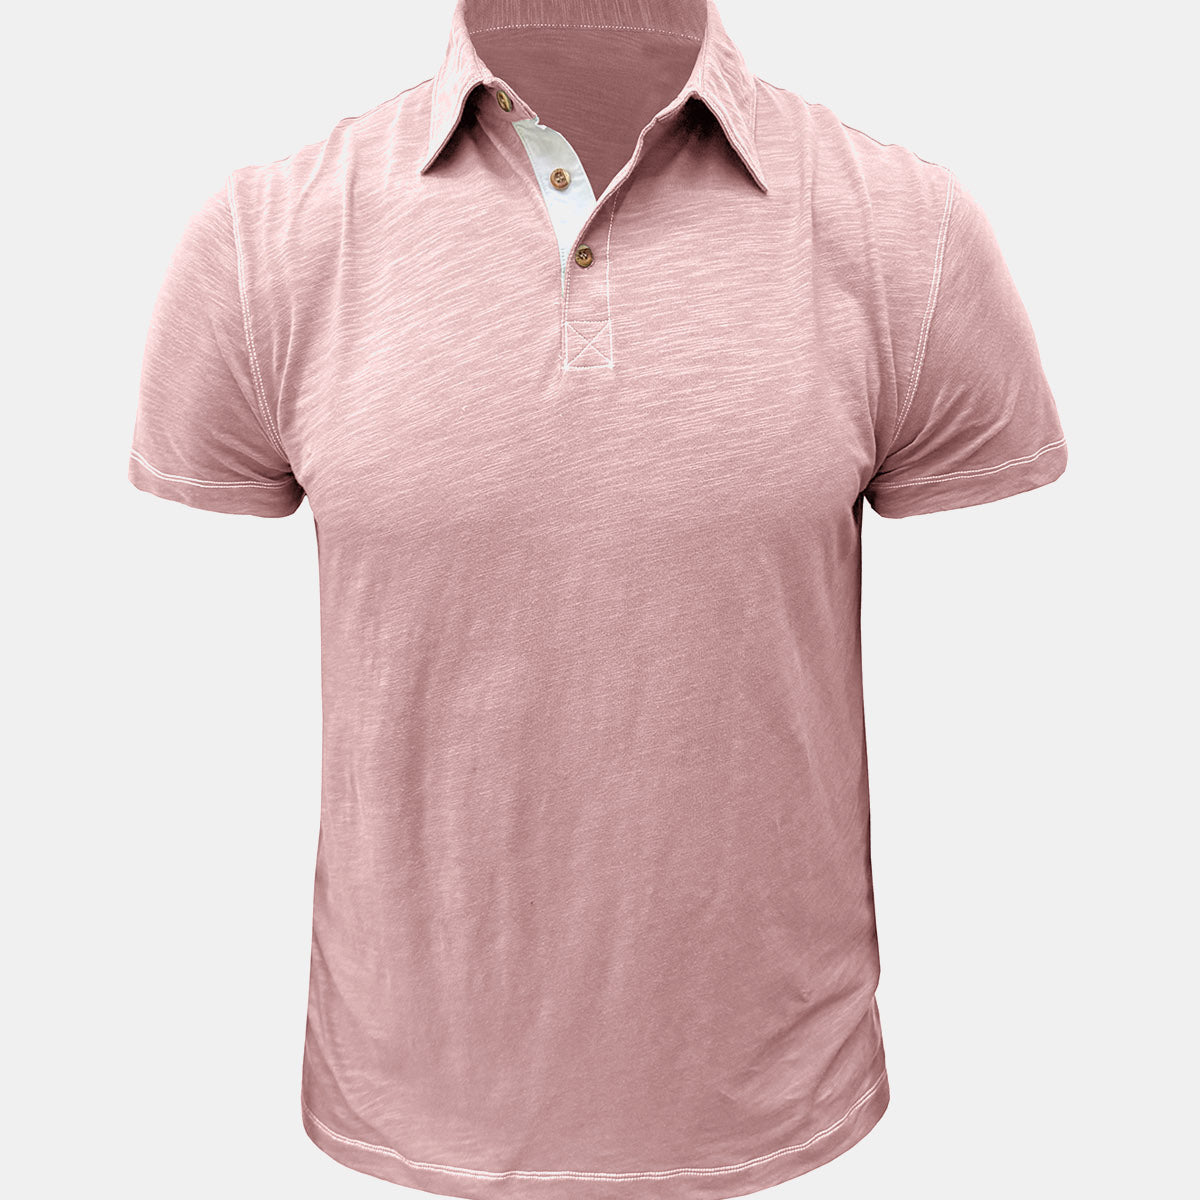 Men's Solid Color Leisure Summer Breathable Cotton Short Sleeve Polo Shirt